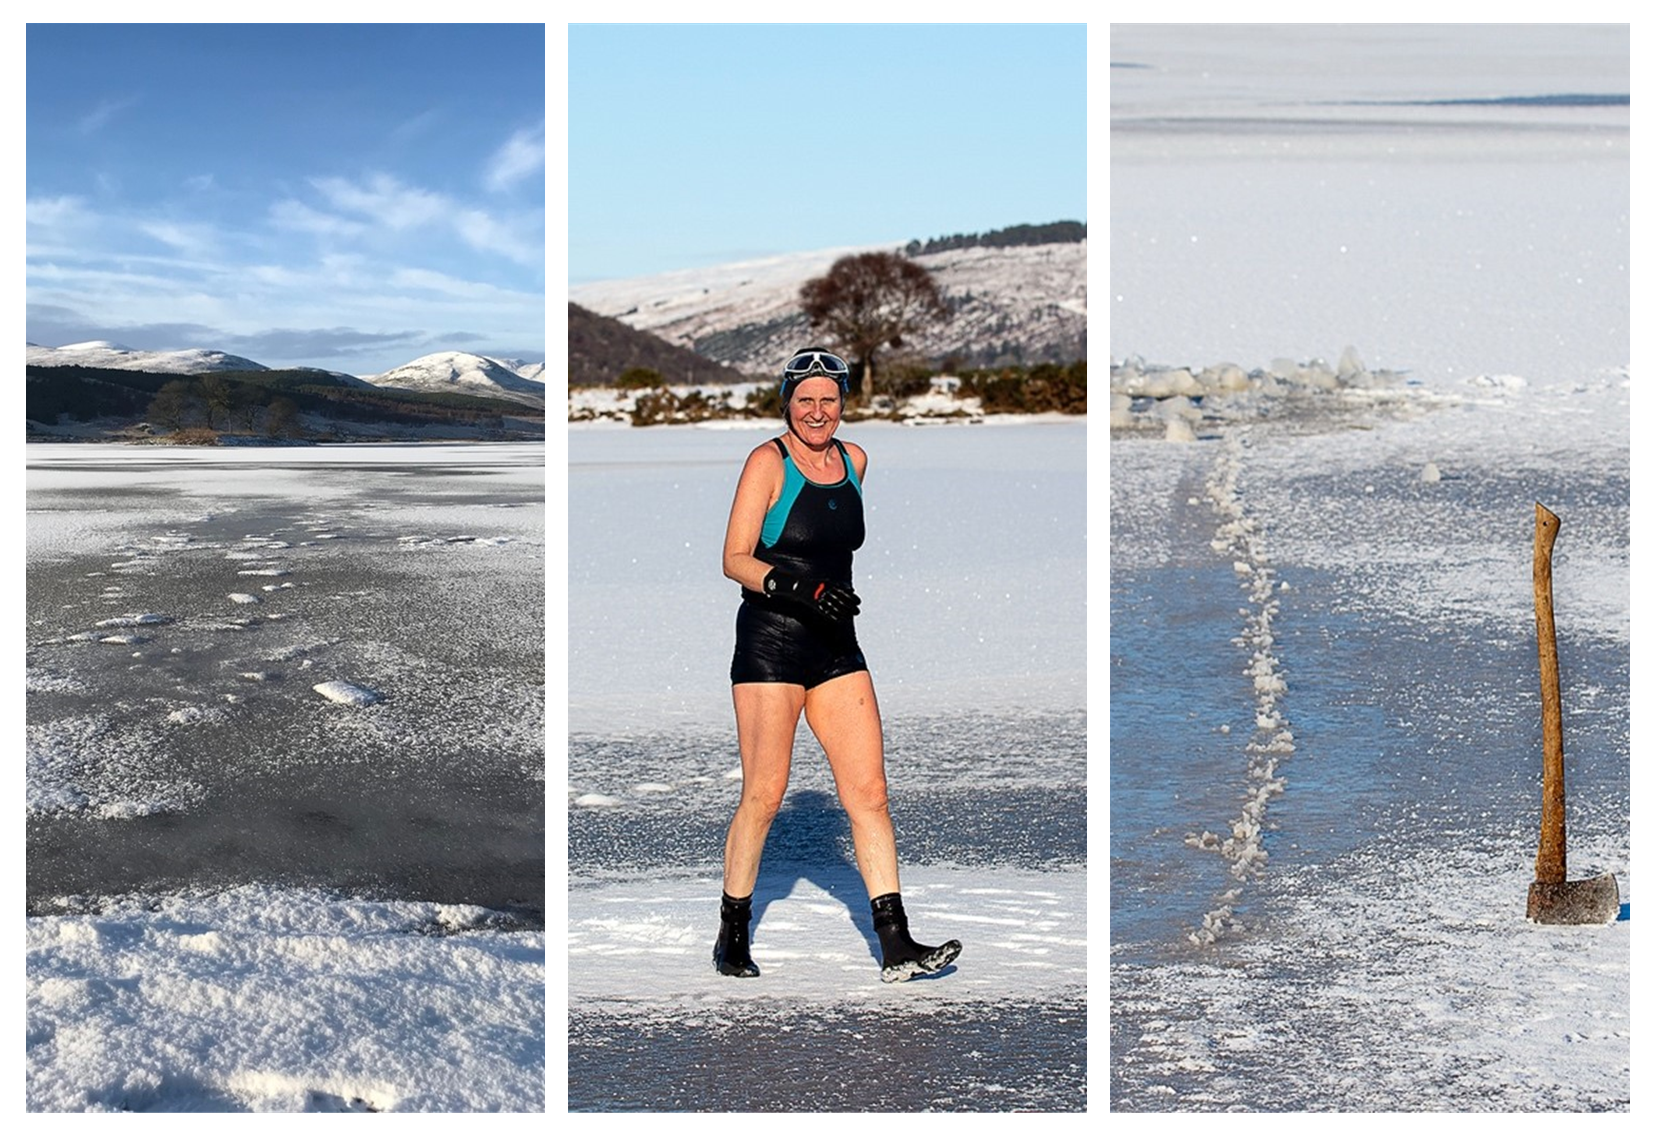 Collage of three images showing a frozen Loch Brora with thick ice, Amanda striding across the ice, and an axe which has been used to break a swim hole through the ice.